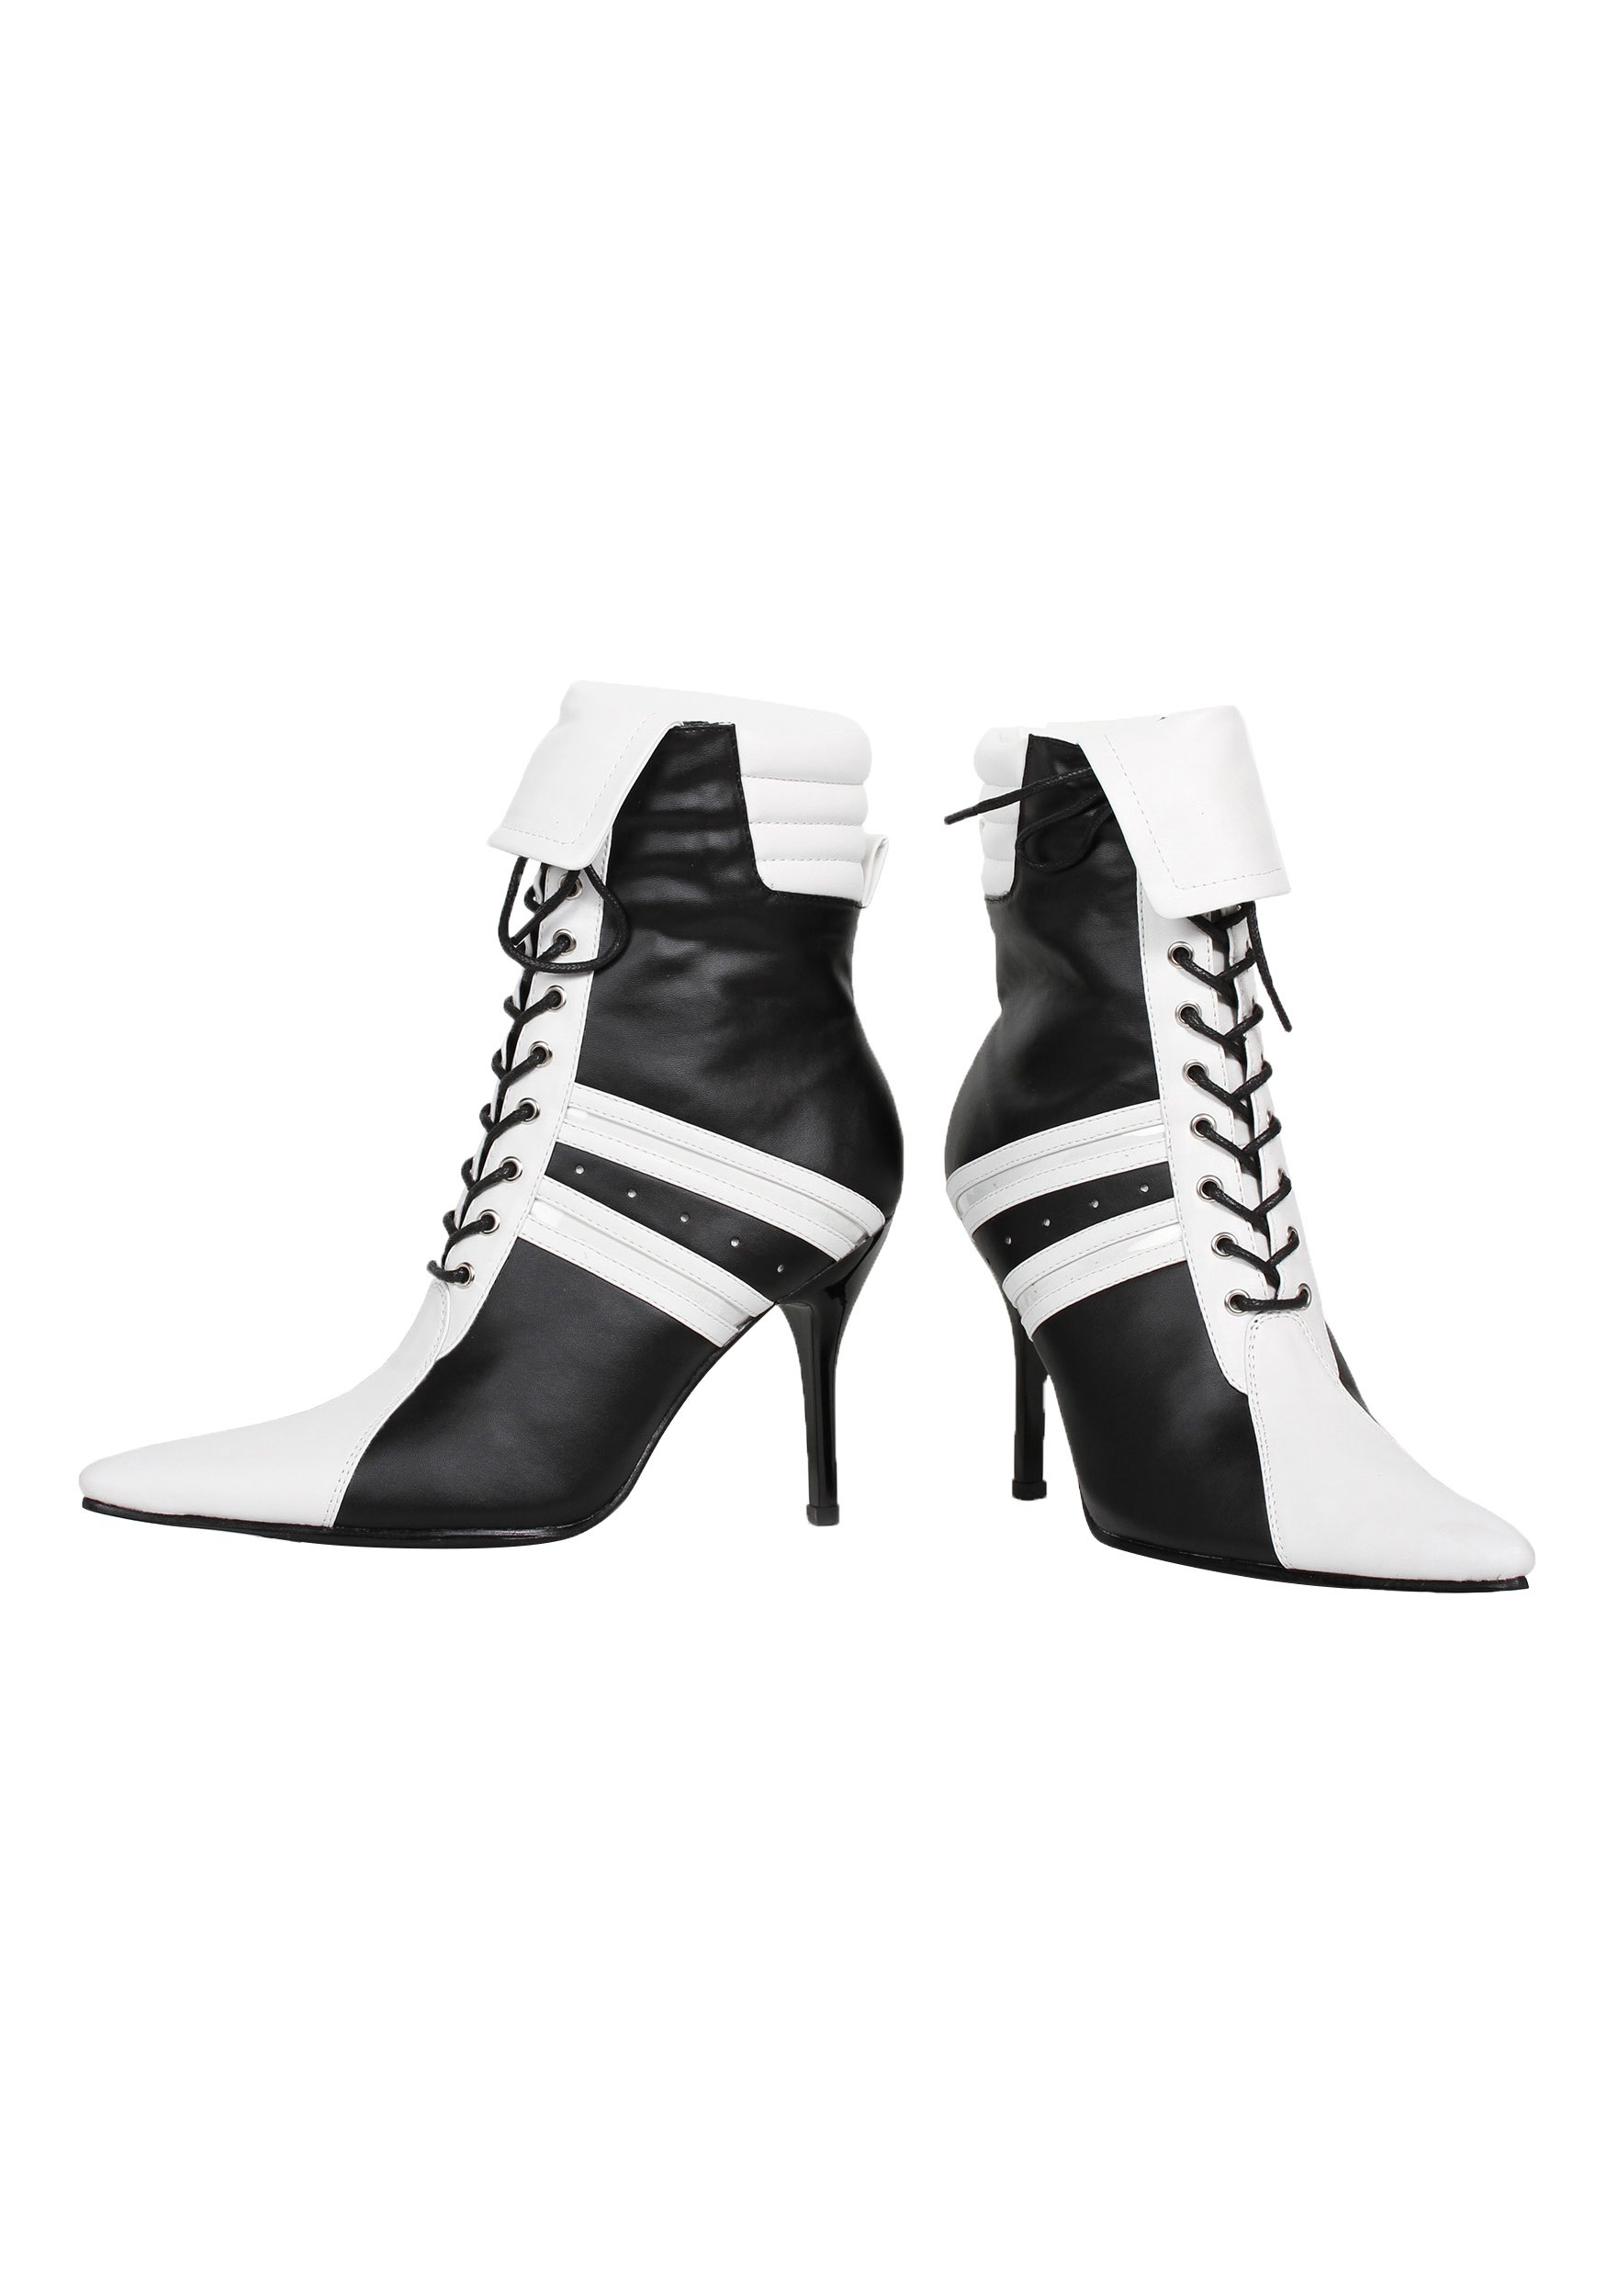 Ref Shoes for Women